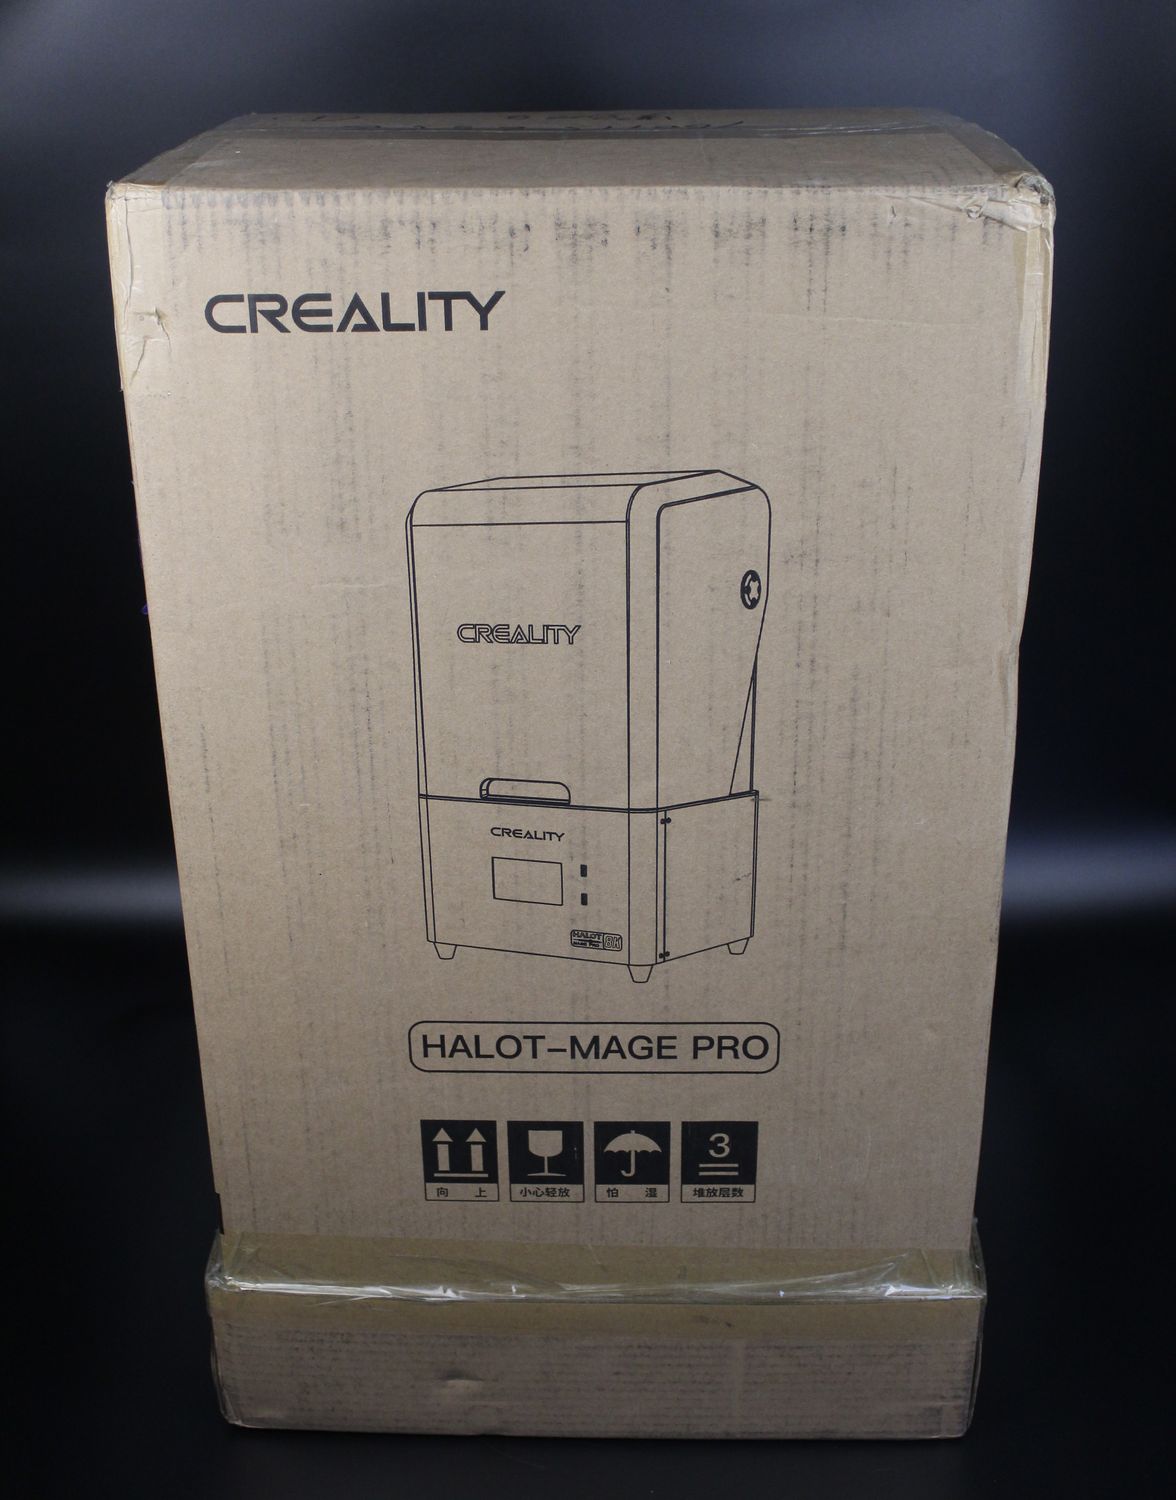 Creality Halot Mage Pro Review Packaging1 | Creality Halot Mage Pro Review: Great Prints, Bad Software